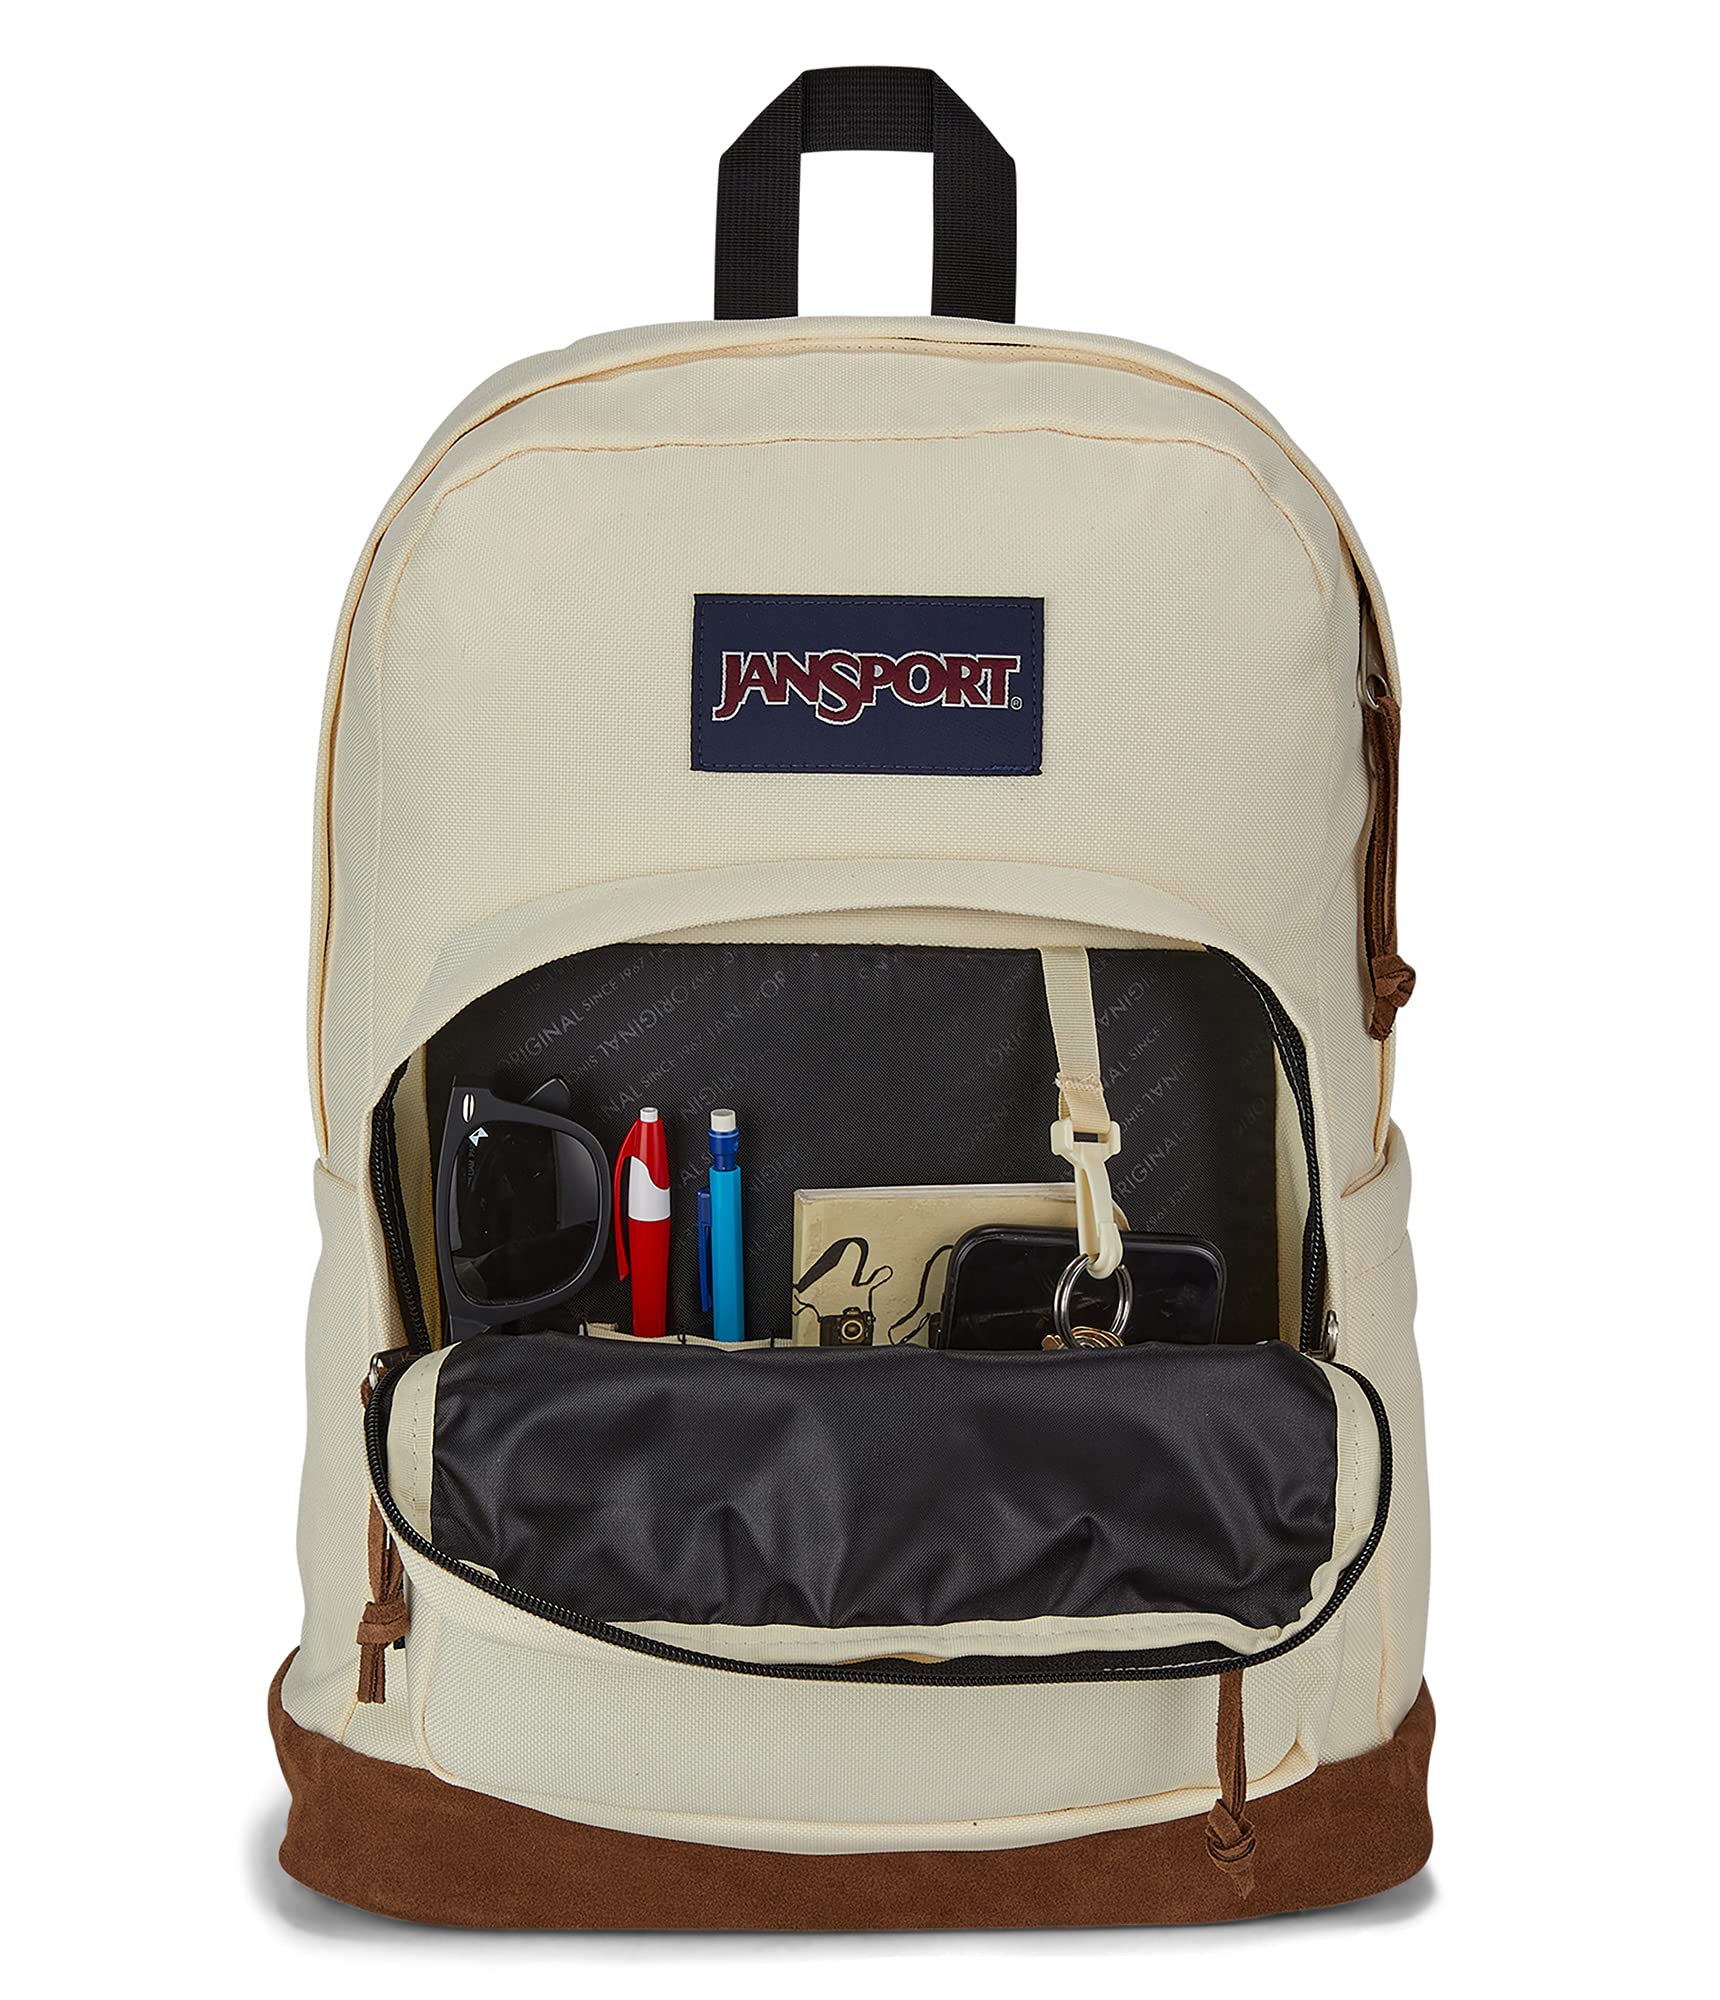 JanSport Right Pack Backpack - Travel, Work, or Laptop Bookbag with Leather Bottom, Coconut